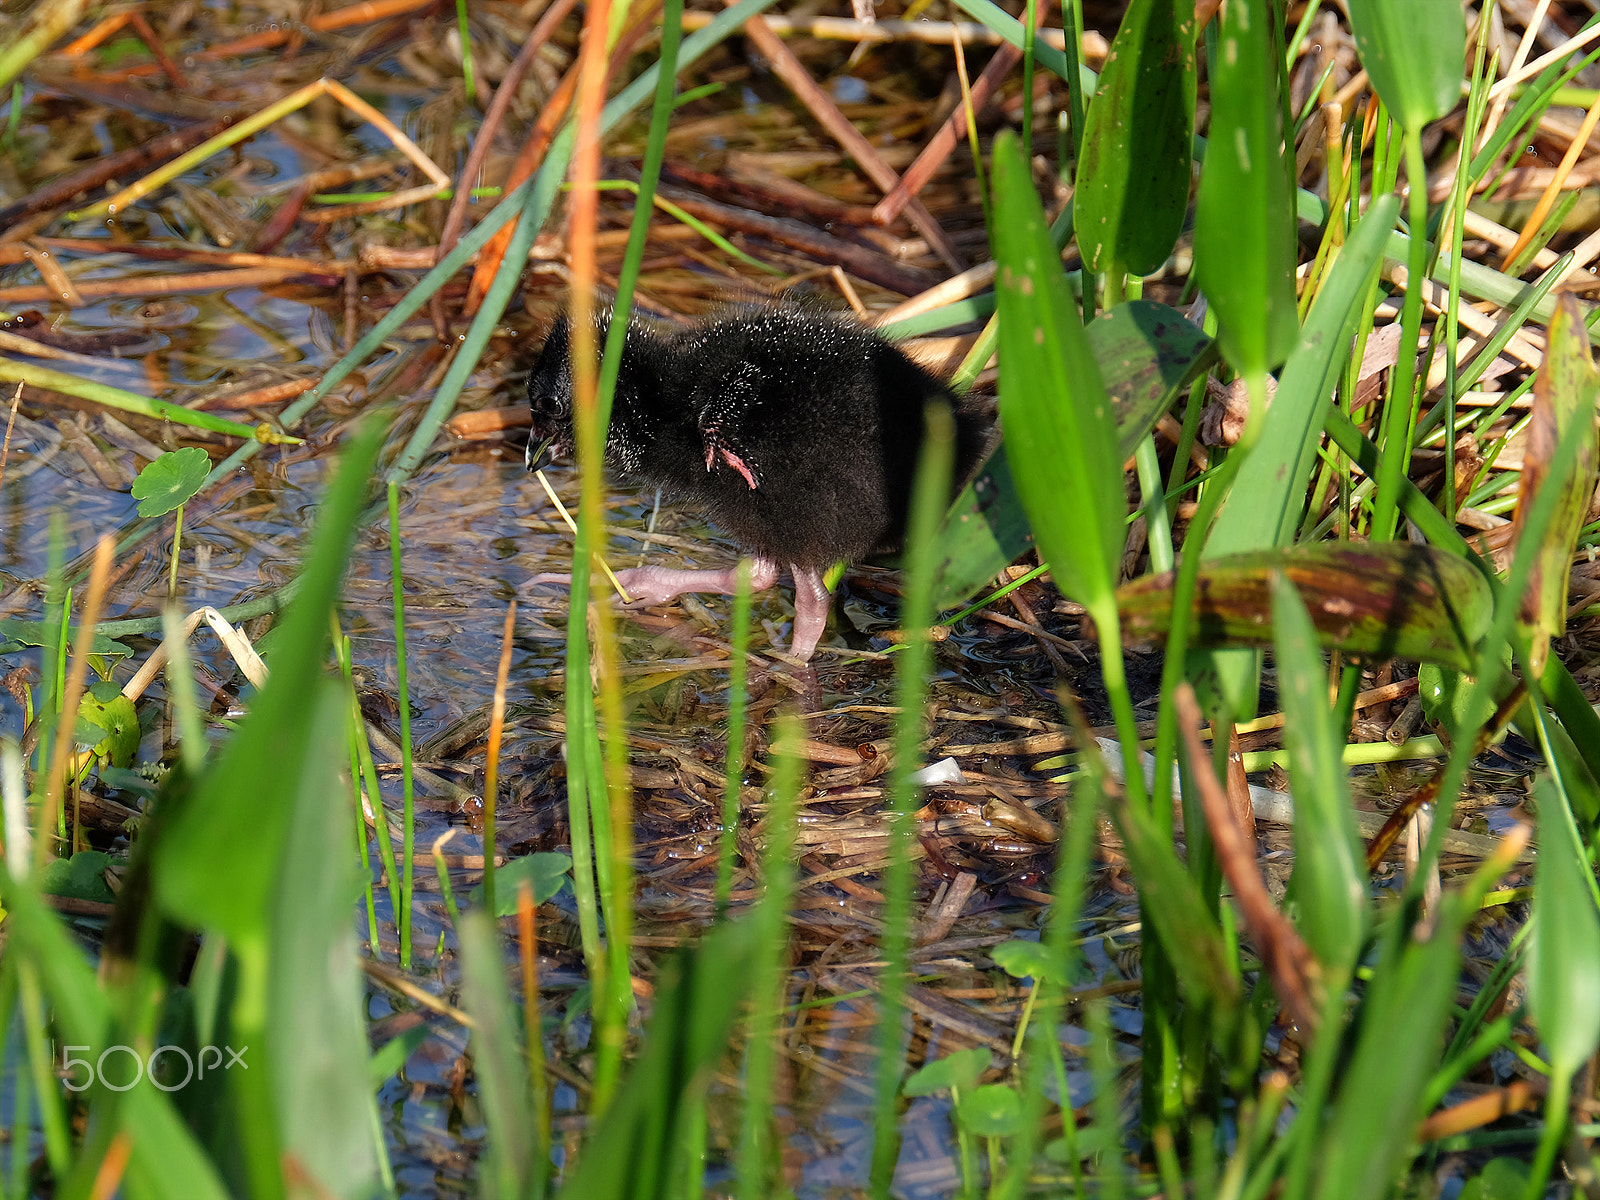 XF100-400mmF4.5-5.6 R LM OIS WR + 1.4x sample photo. Baby purple gallinule eating photography